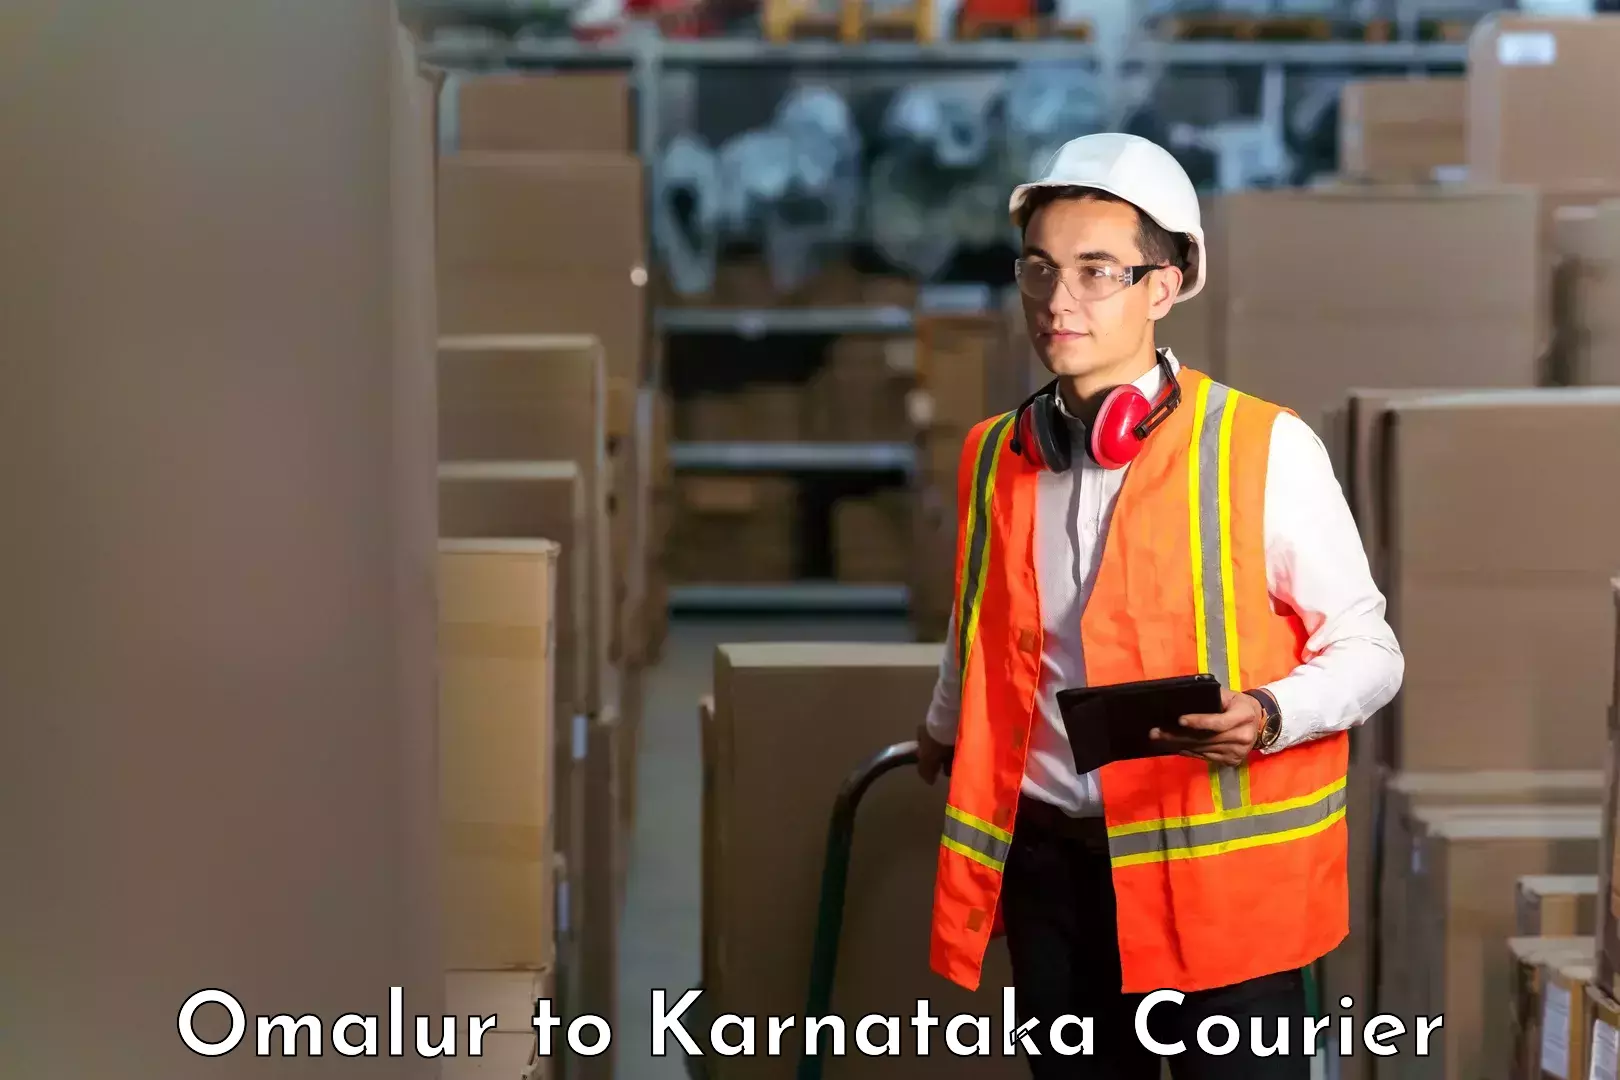 On-call courier service Omalur to Pavagada